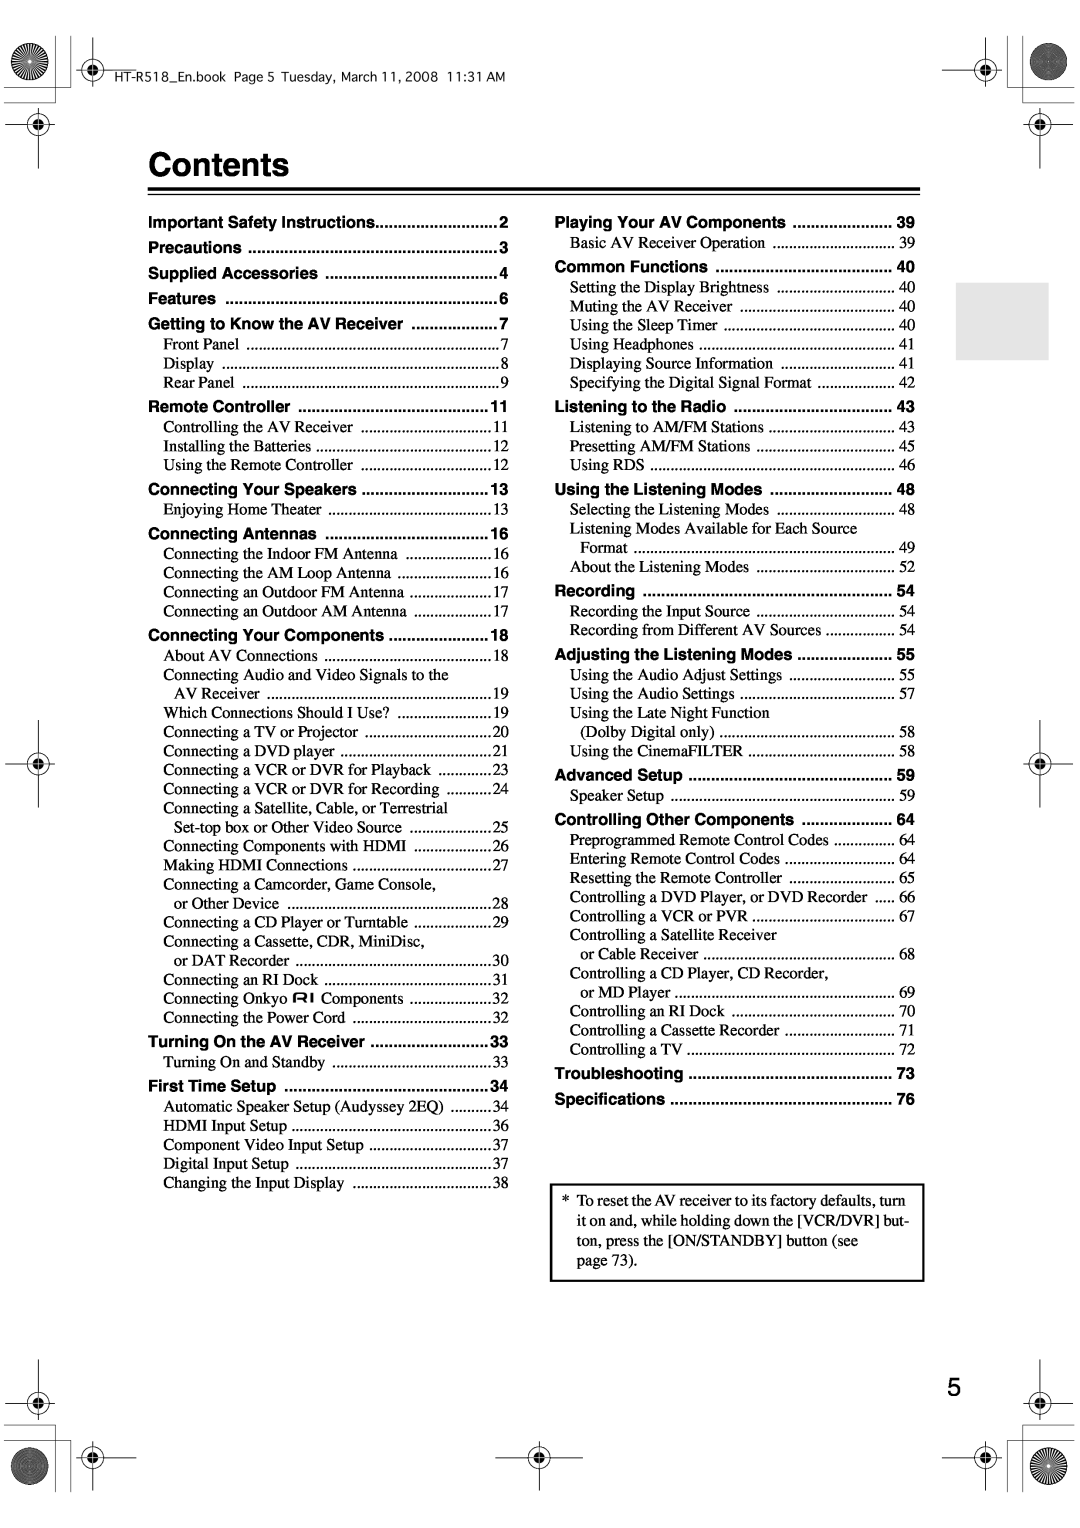 Onkyo HT-R518 instruction manual Contents 